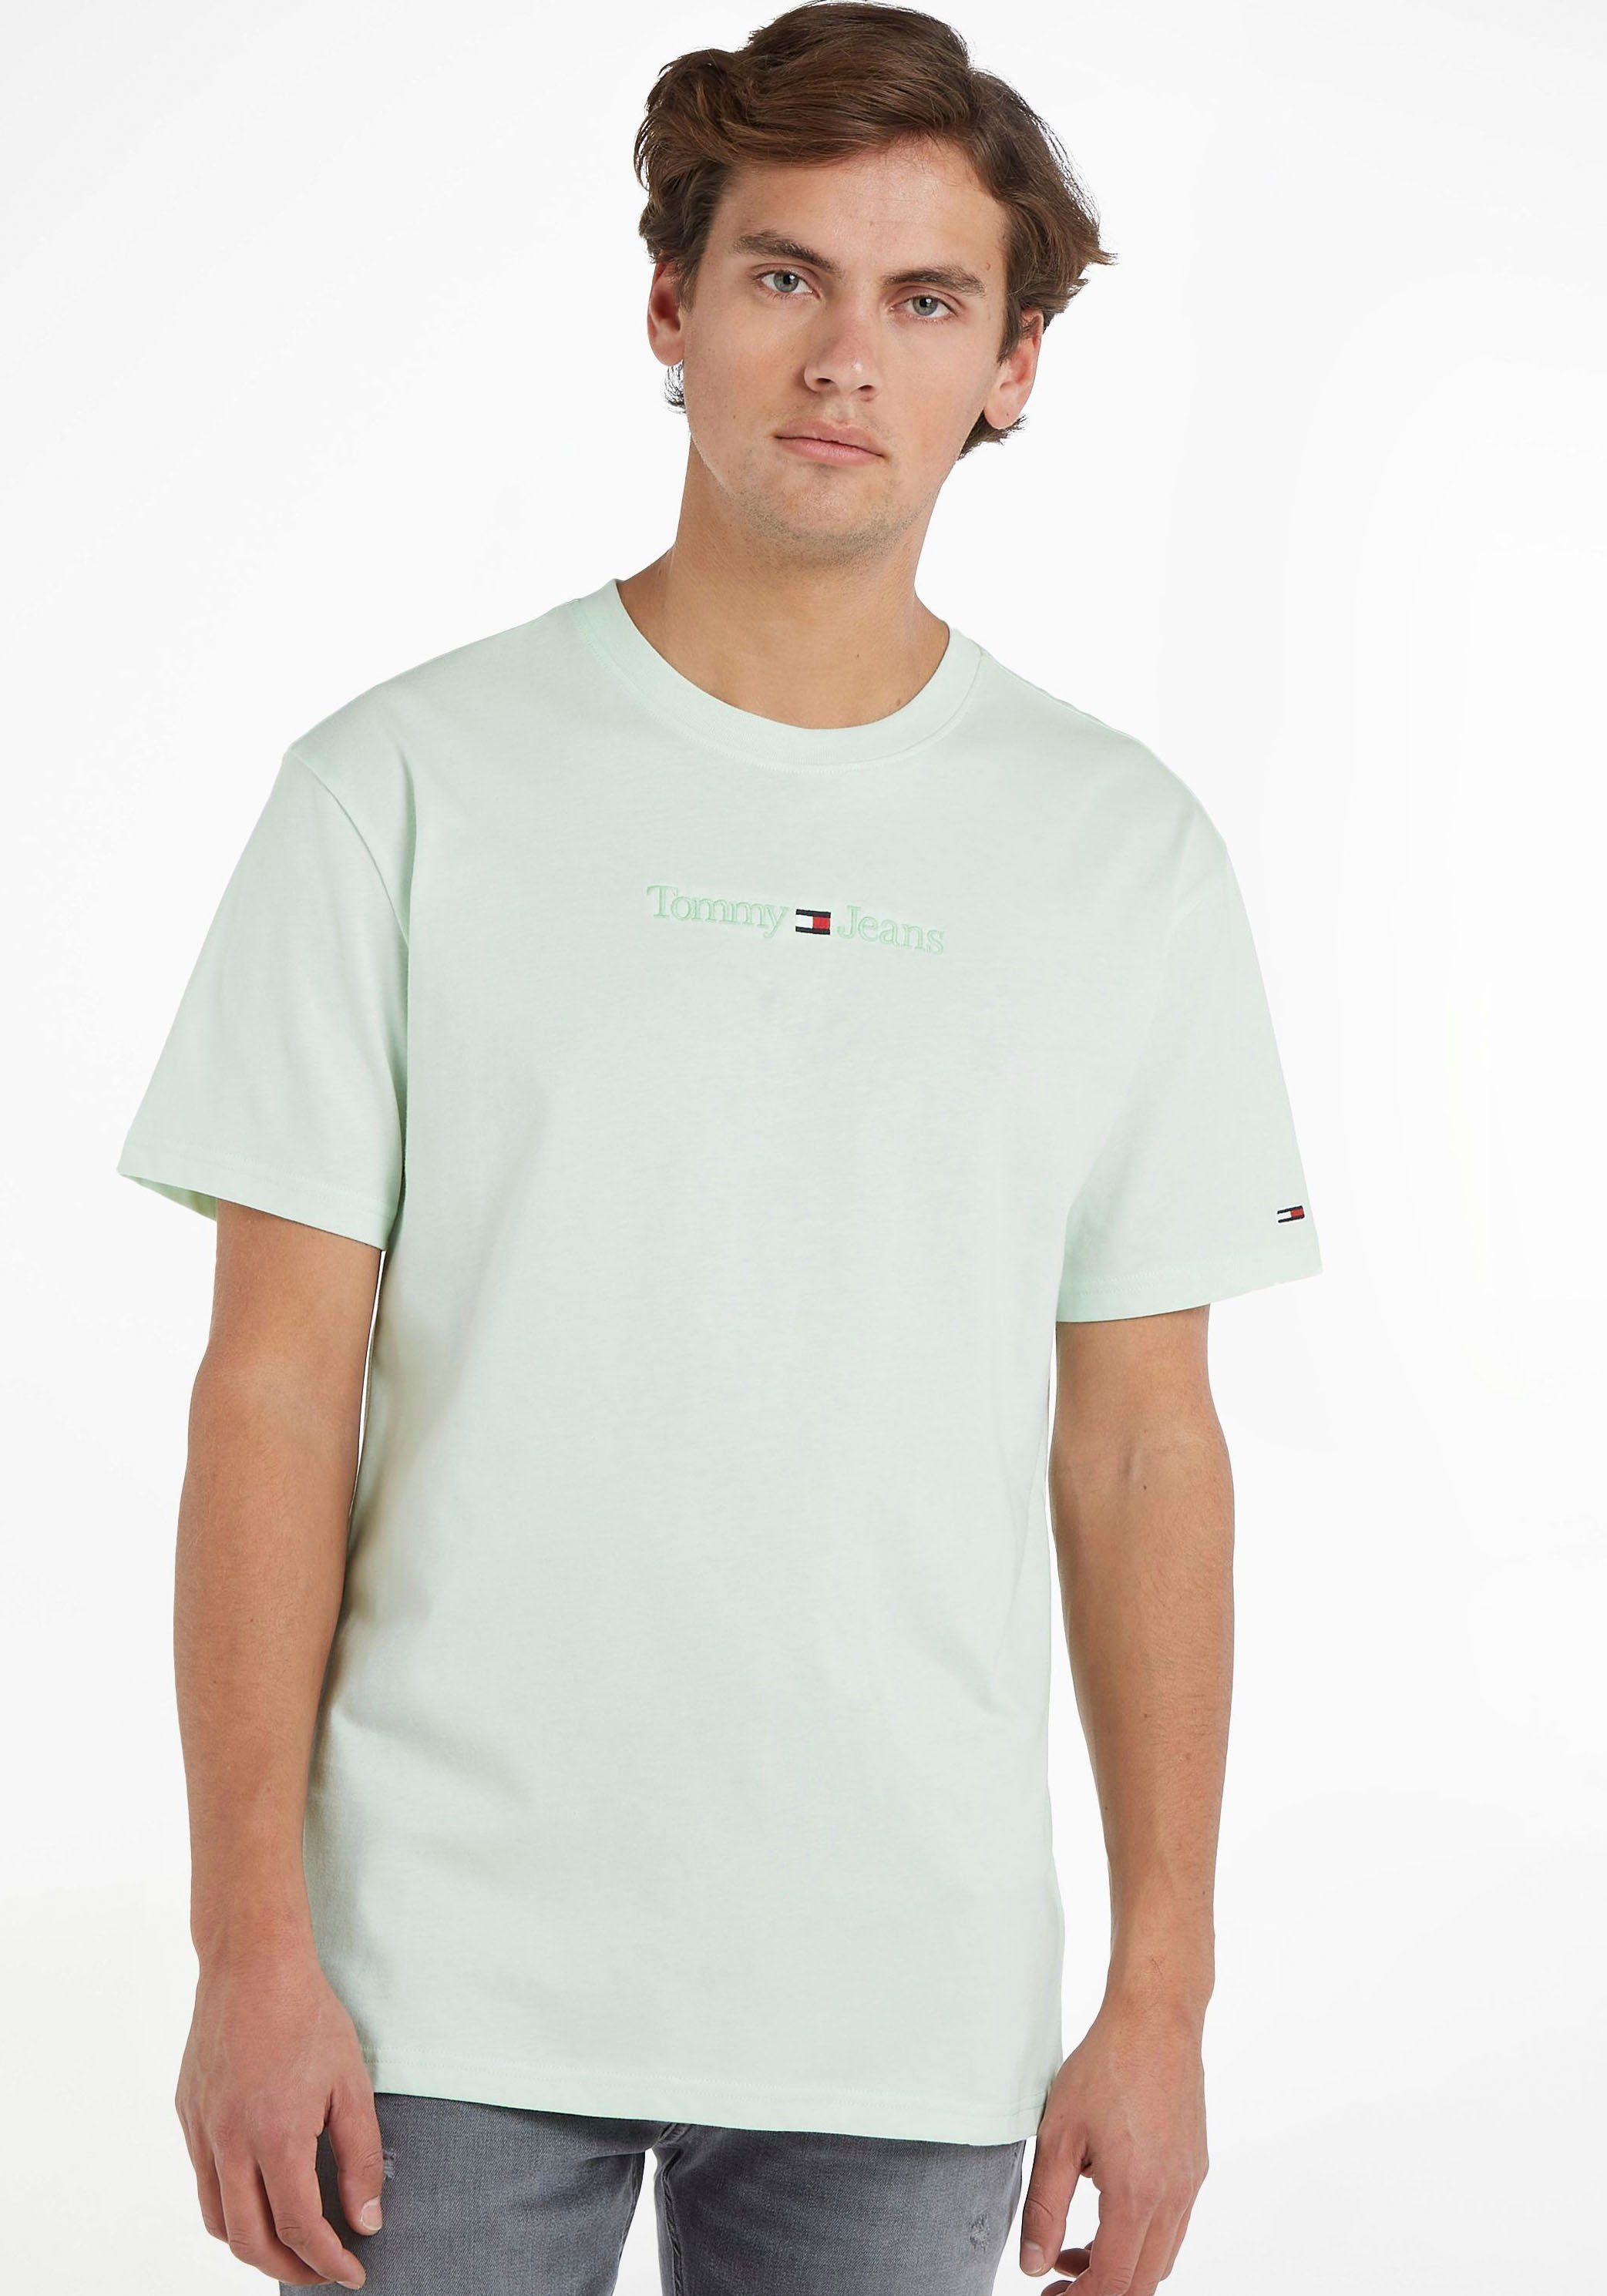 SMALL Tommy Jeans TJM TEE T-Shirt CLSC Minty TEXT